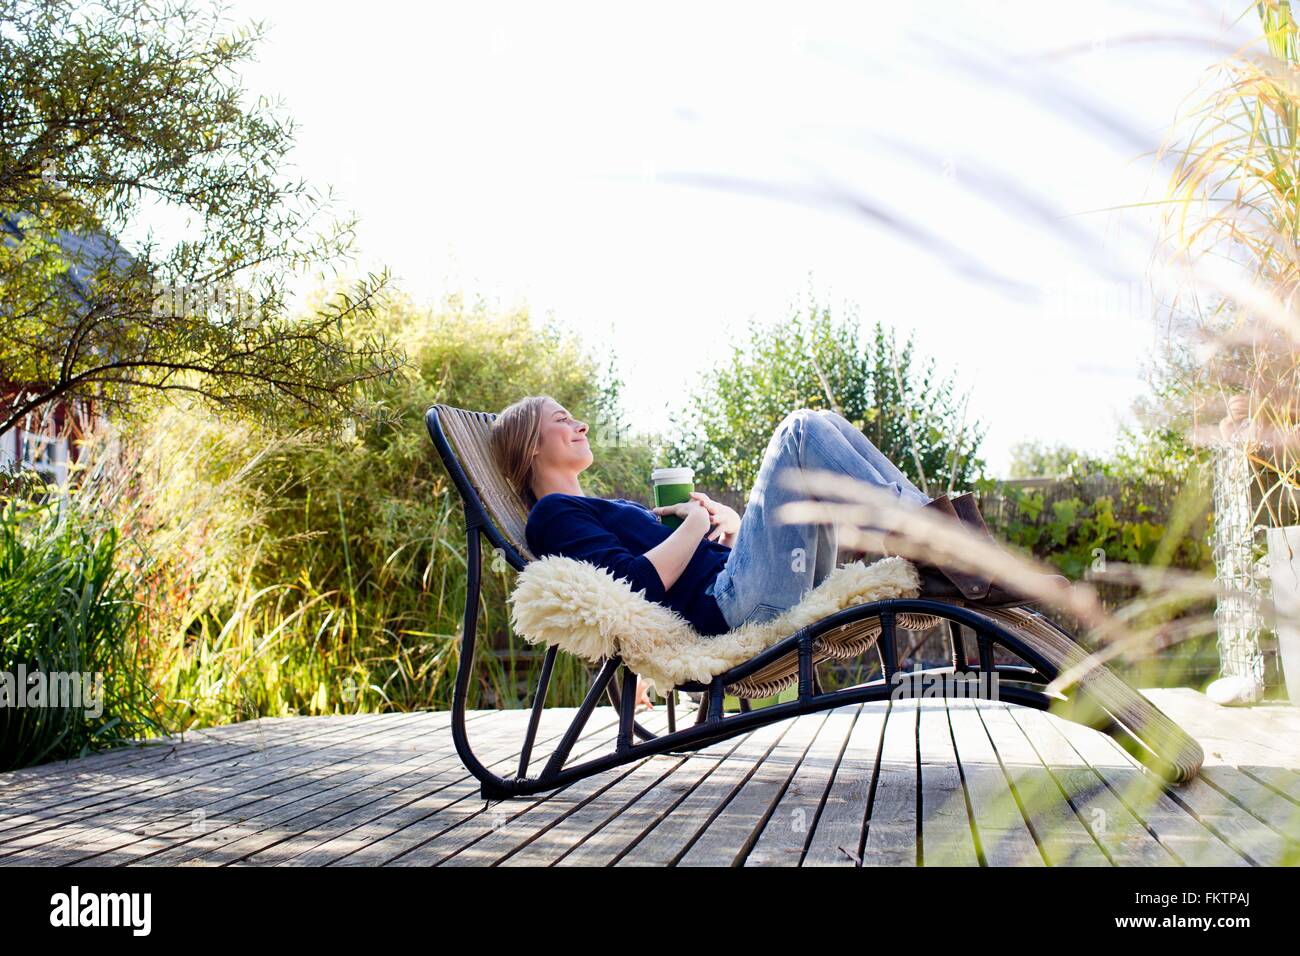 Mid adult woman relaxing on lounge chair on wooden decking Stock Photo